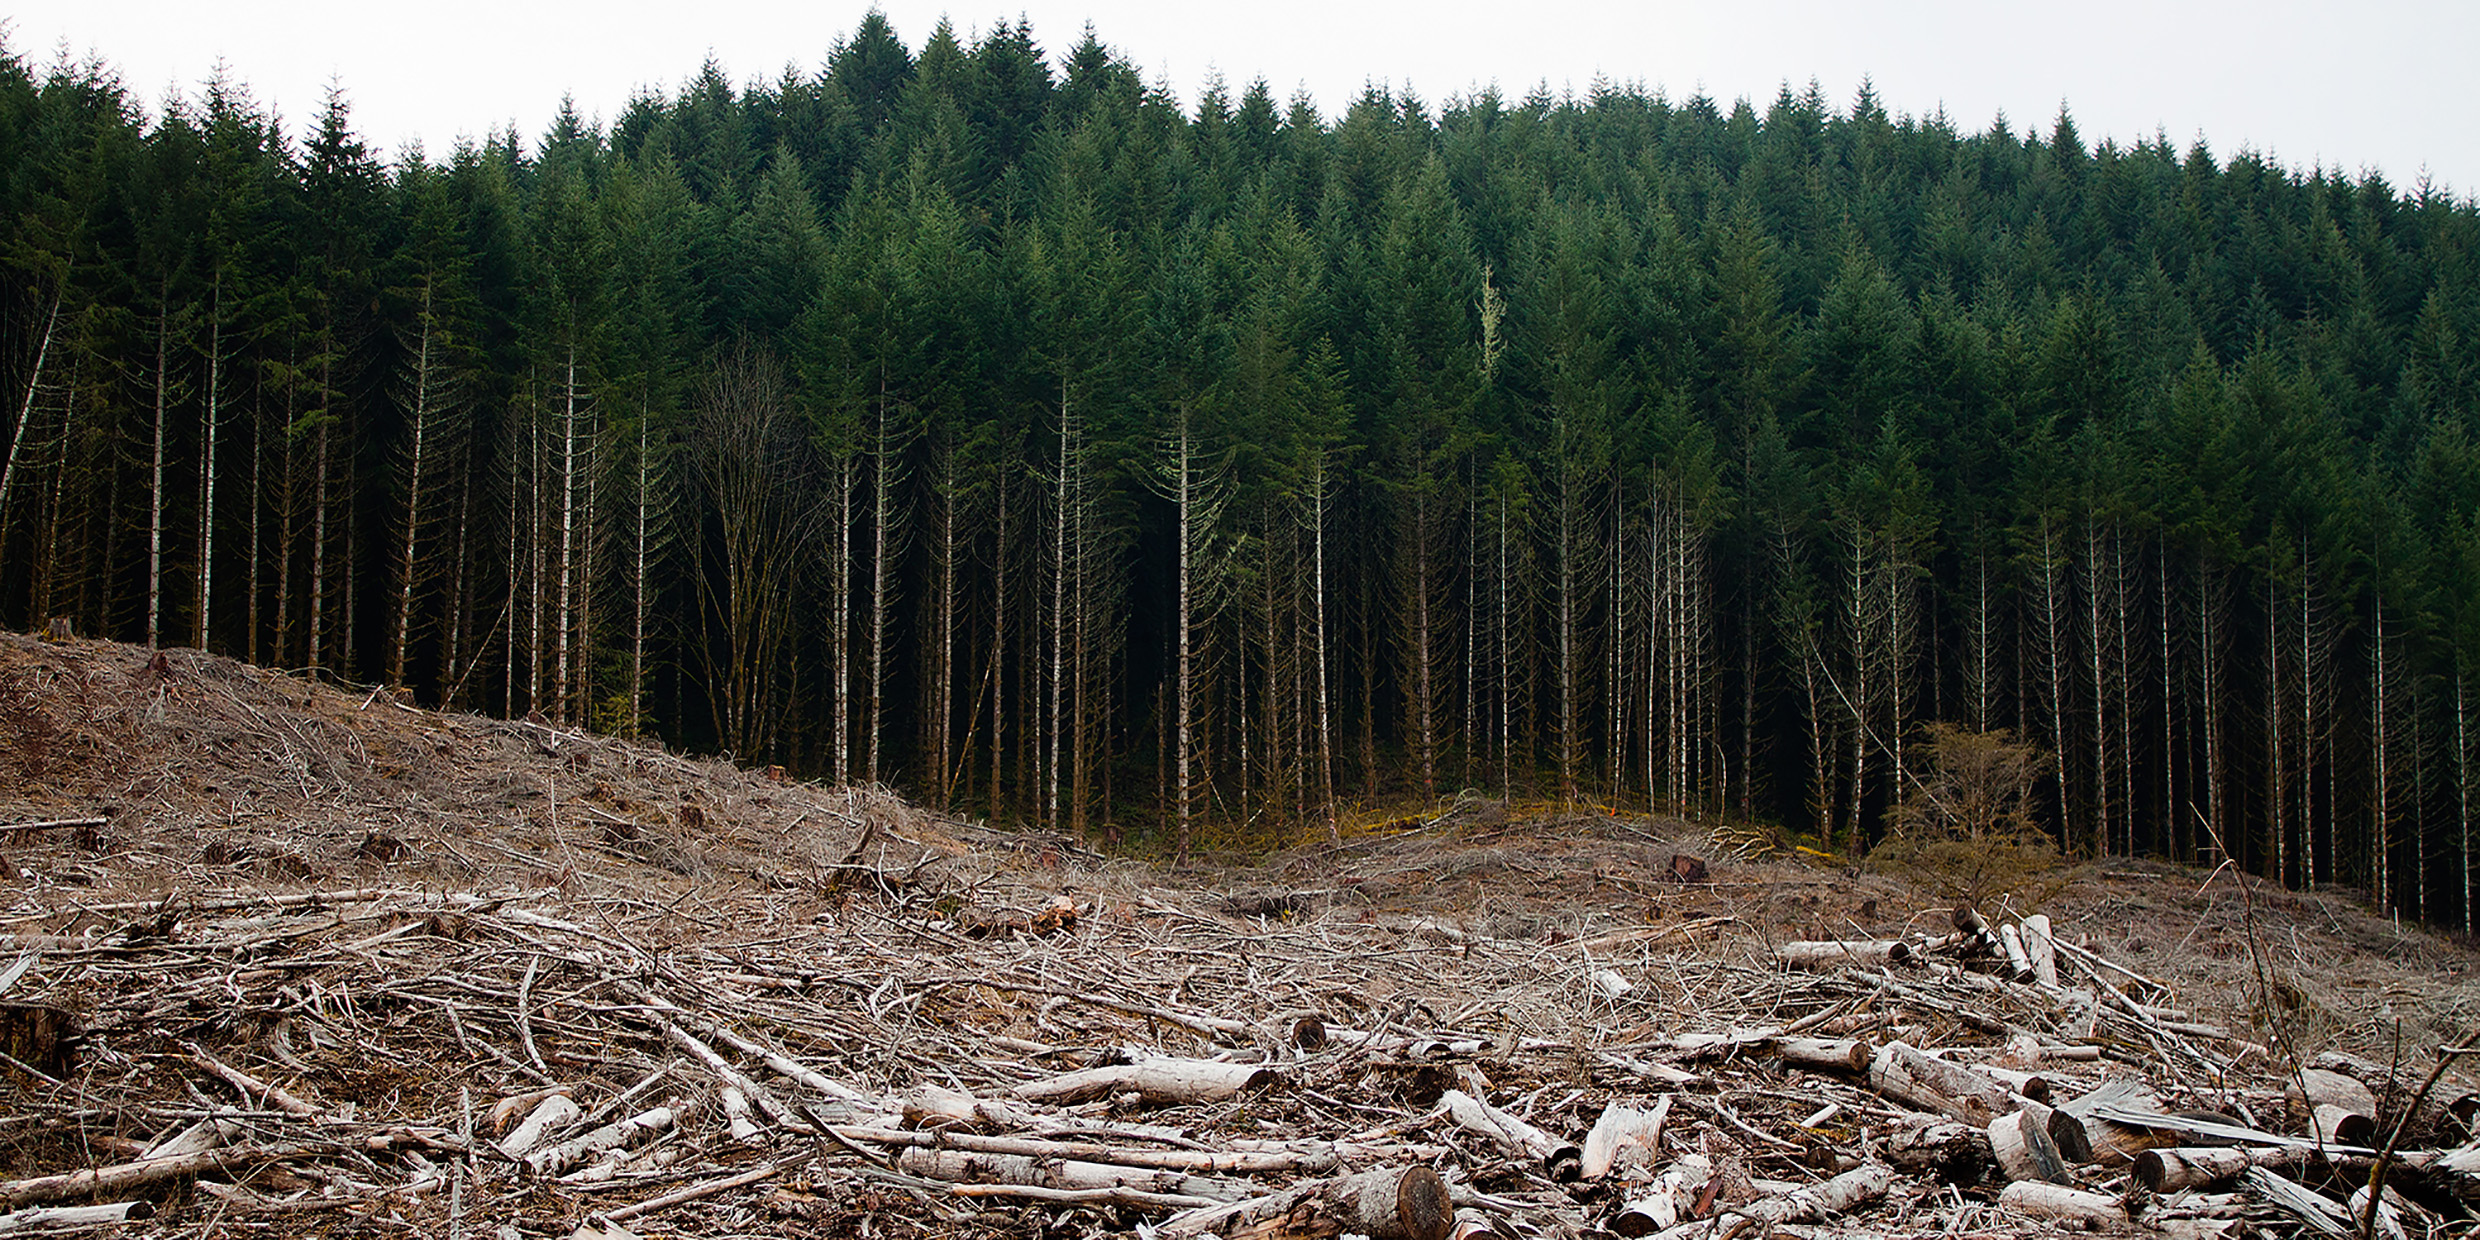 Image of clearcut forest